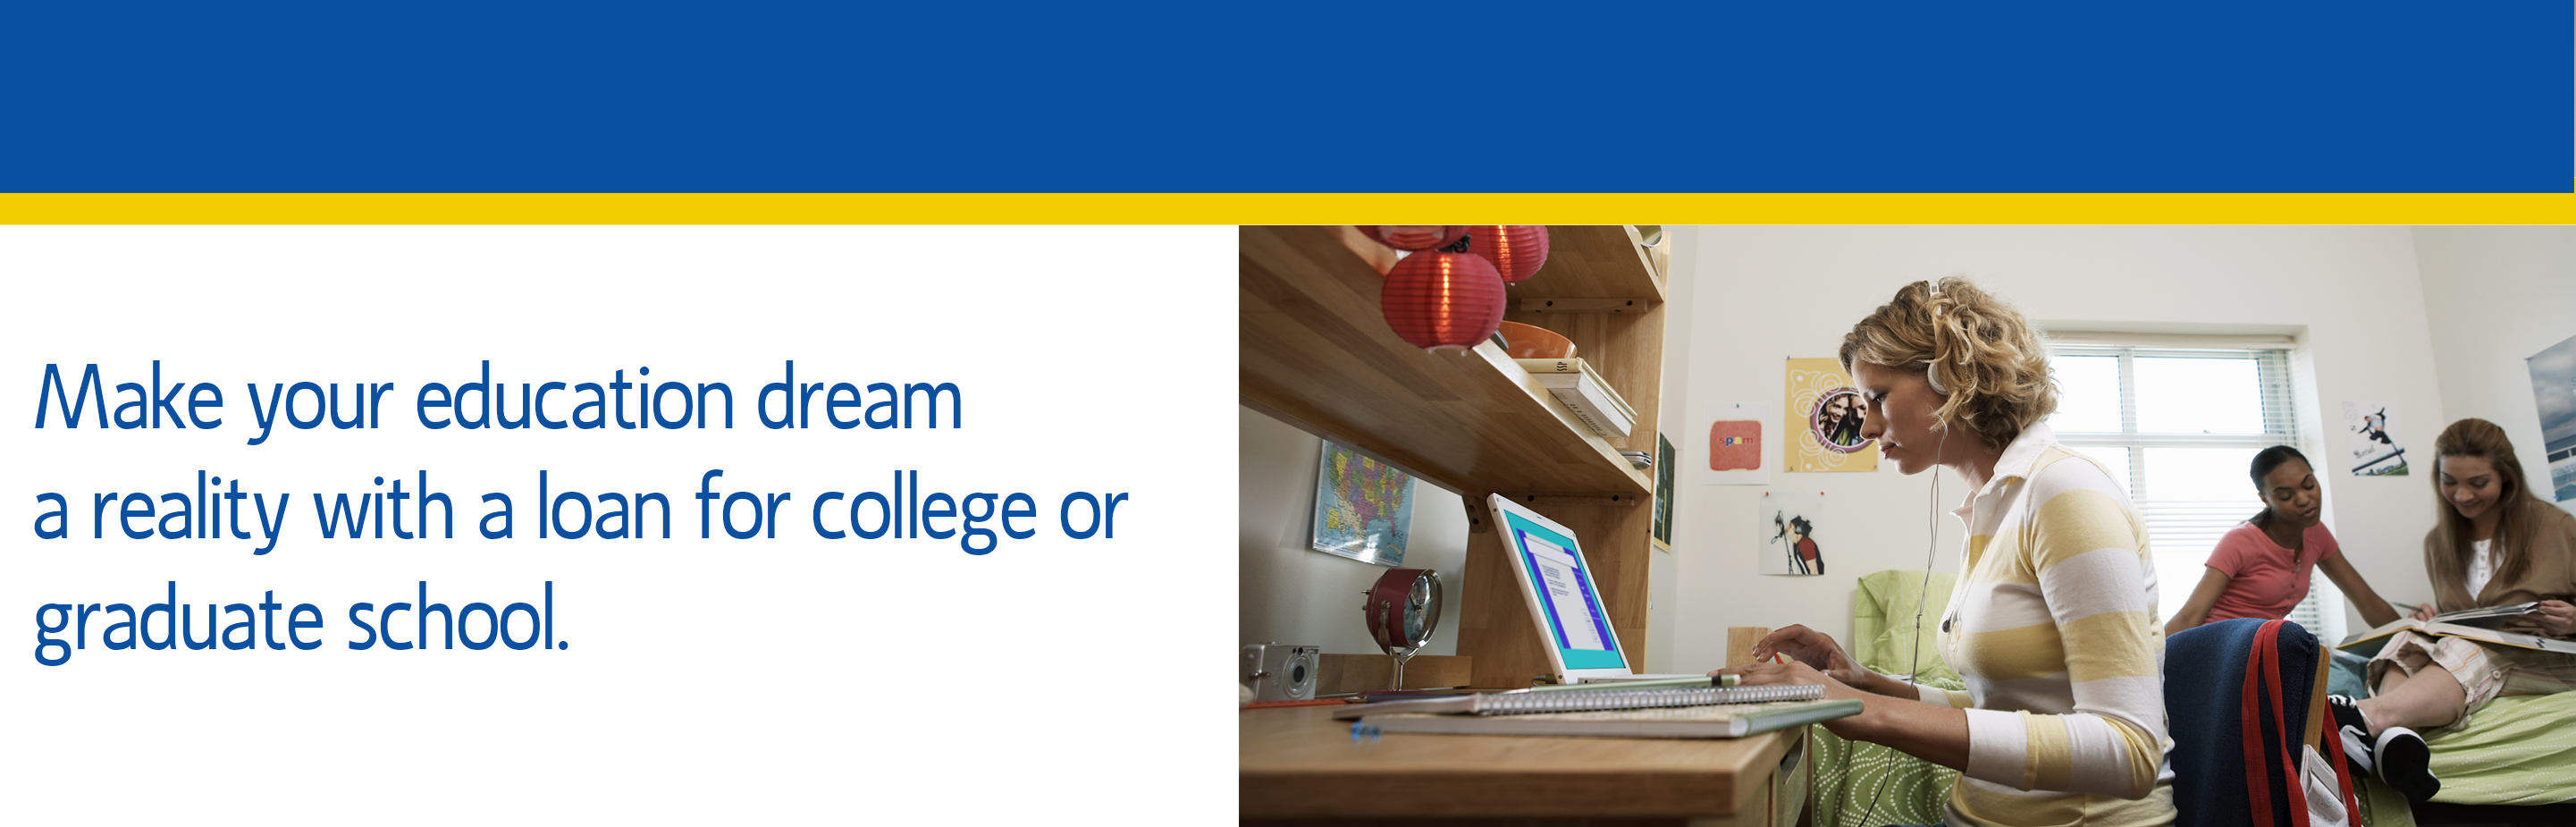 Make your education dream a reality with a loan for college or graduate school